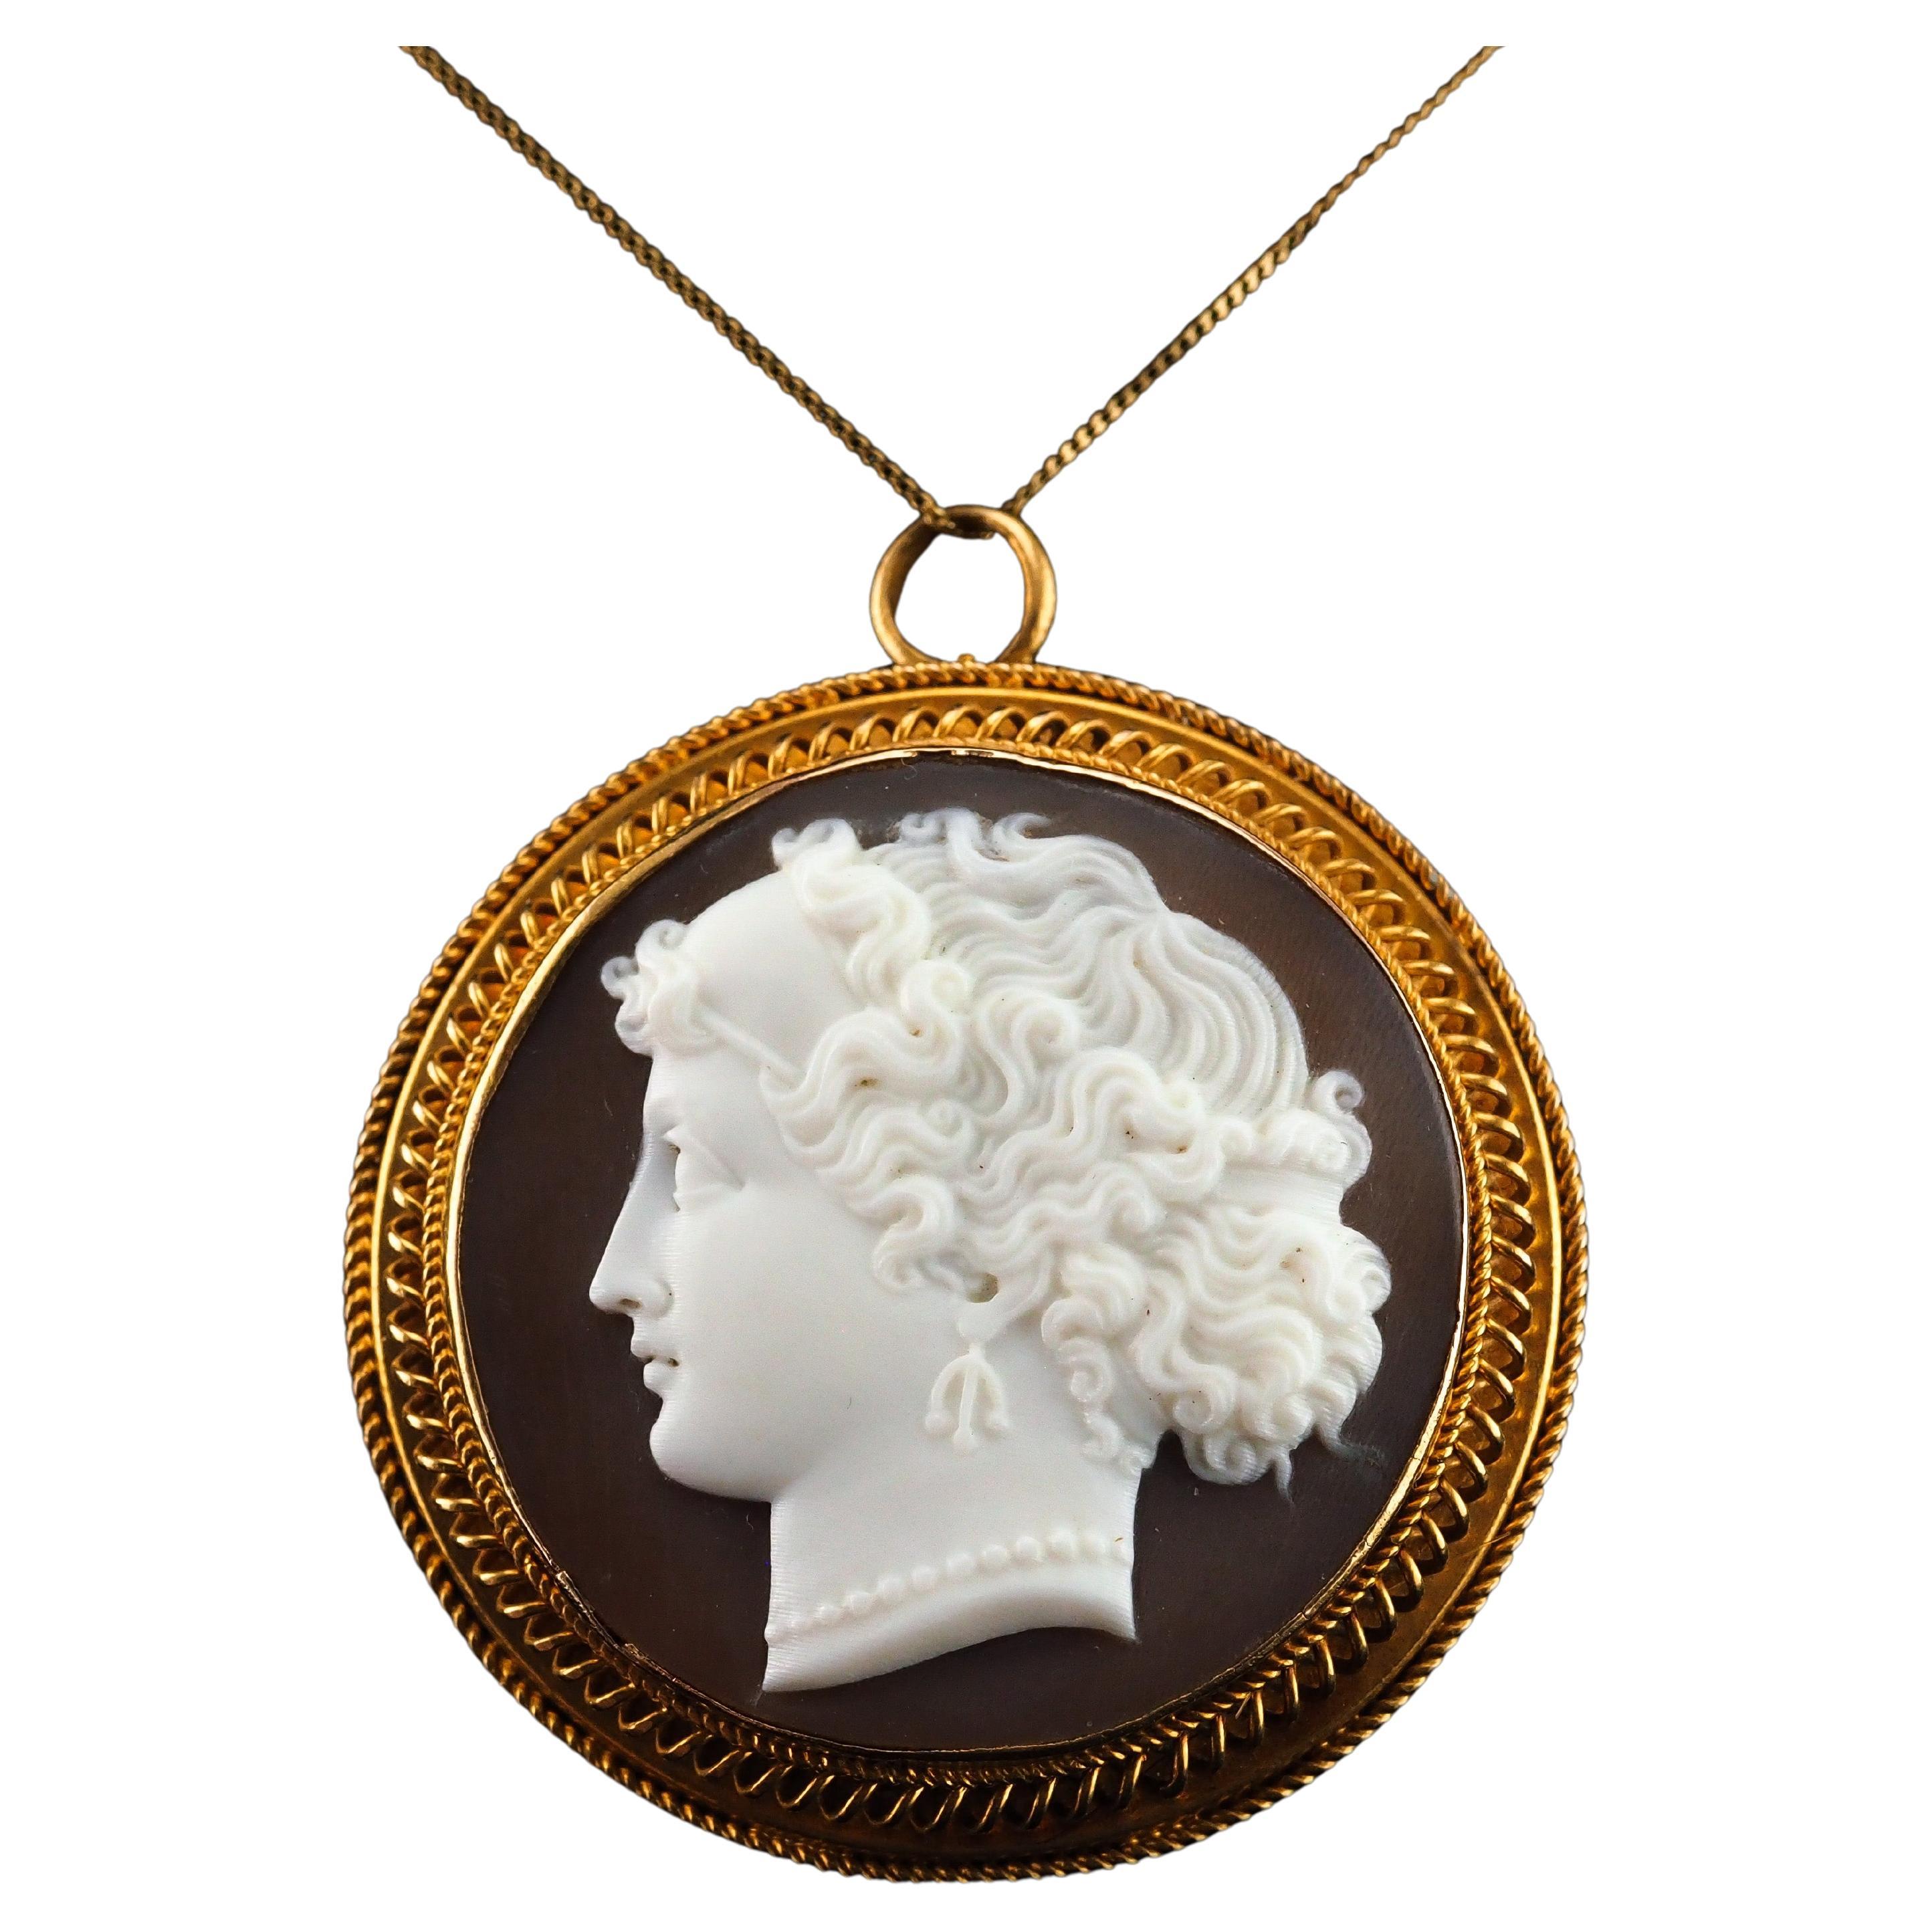 Antique Victorian Cameo 18K Gold Brooch/Pendant Necklace - c.1880